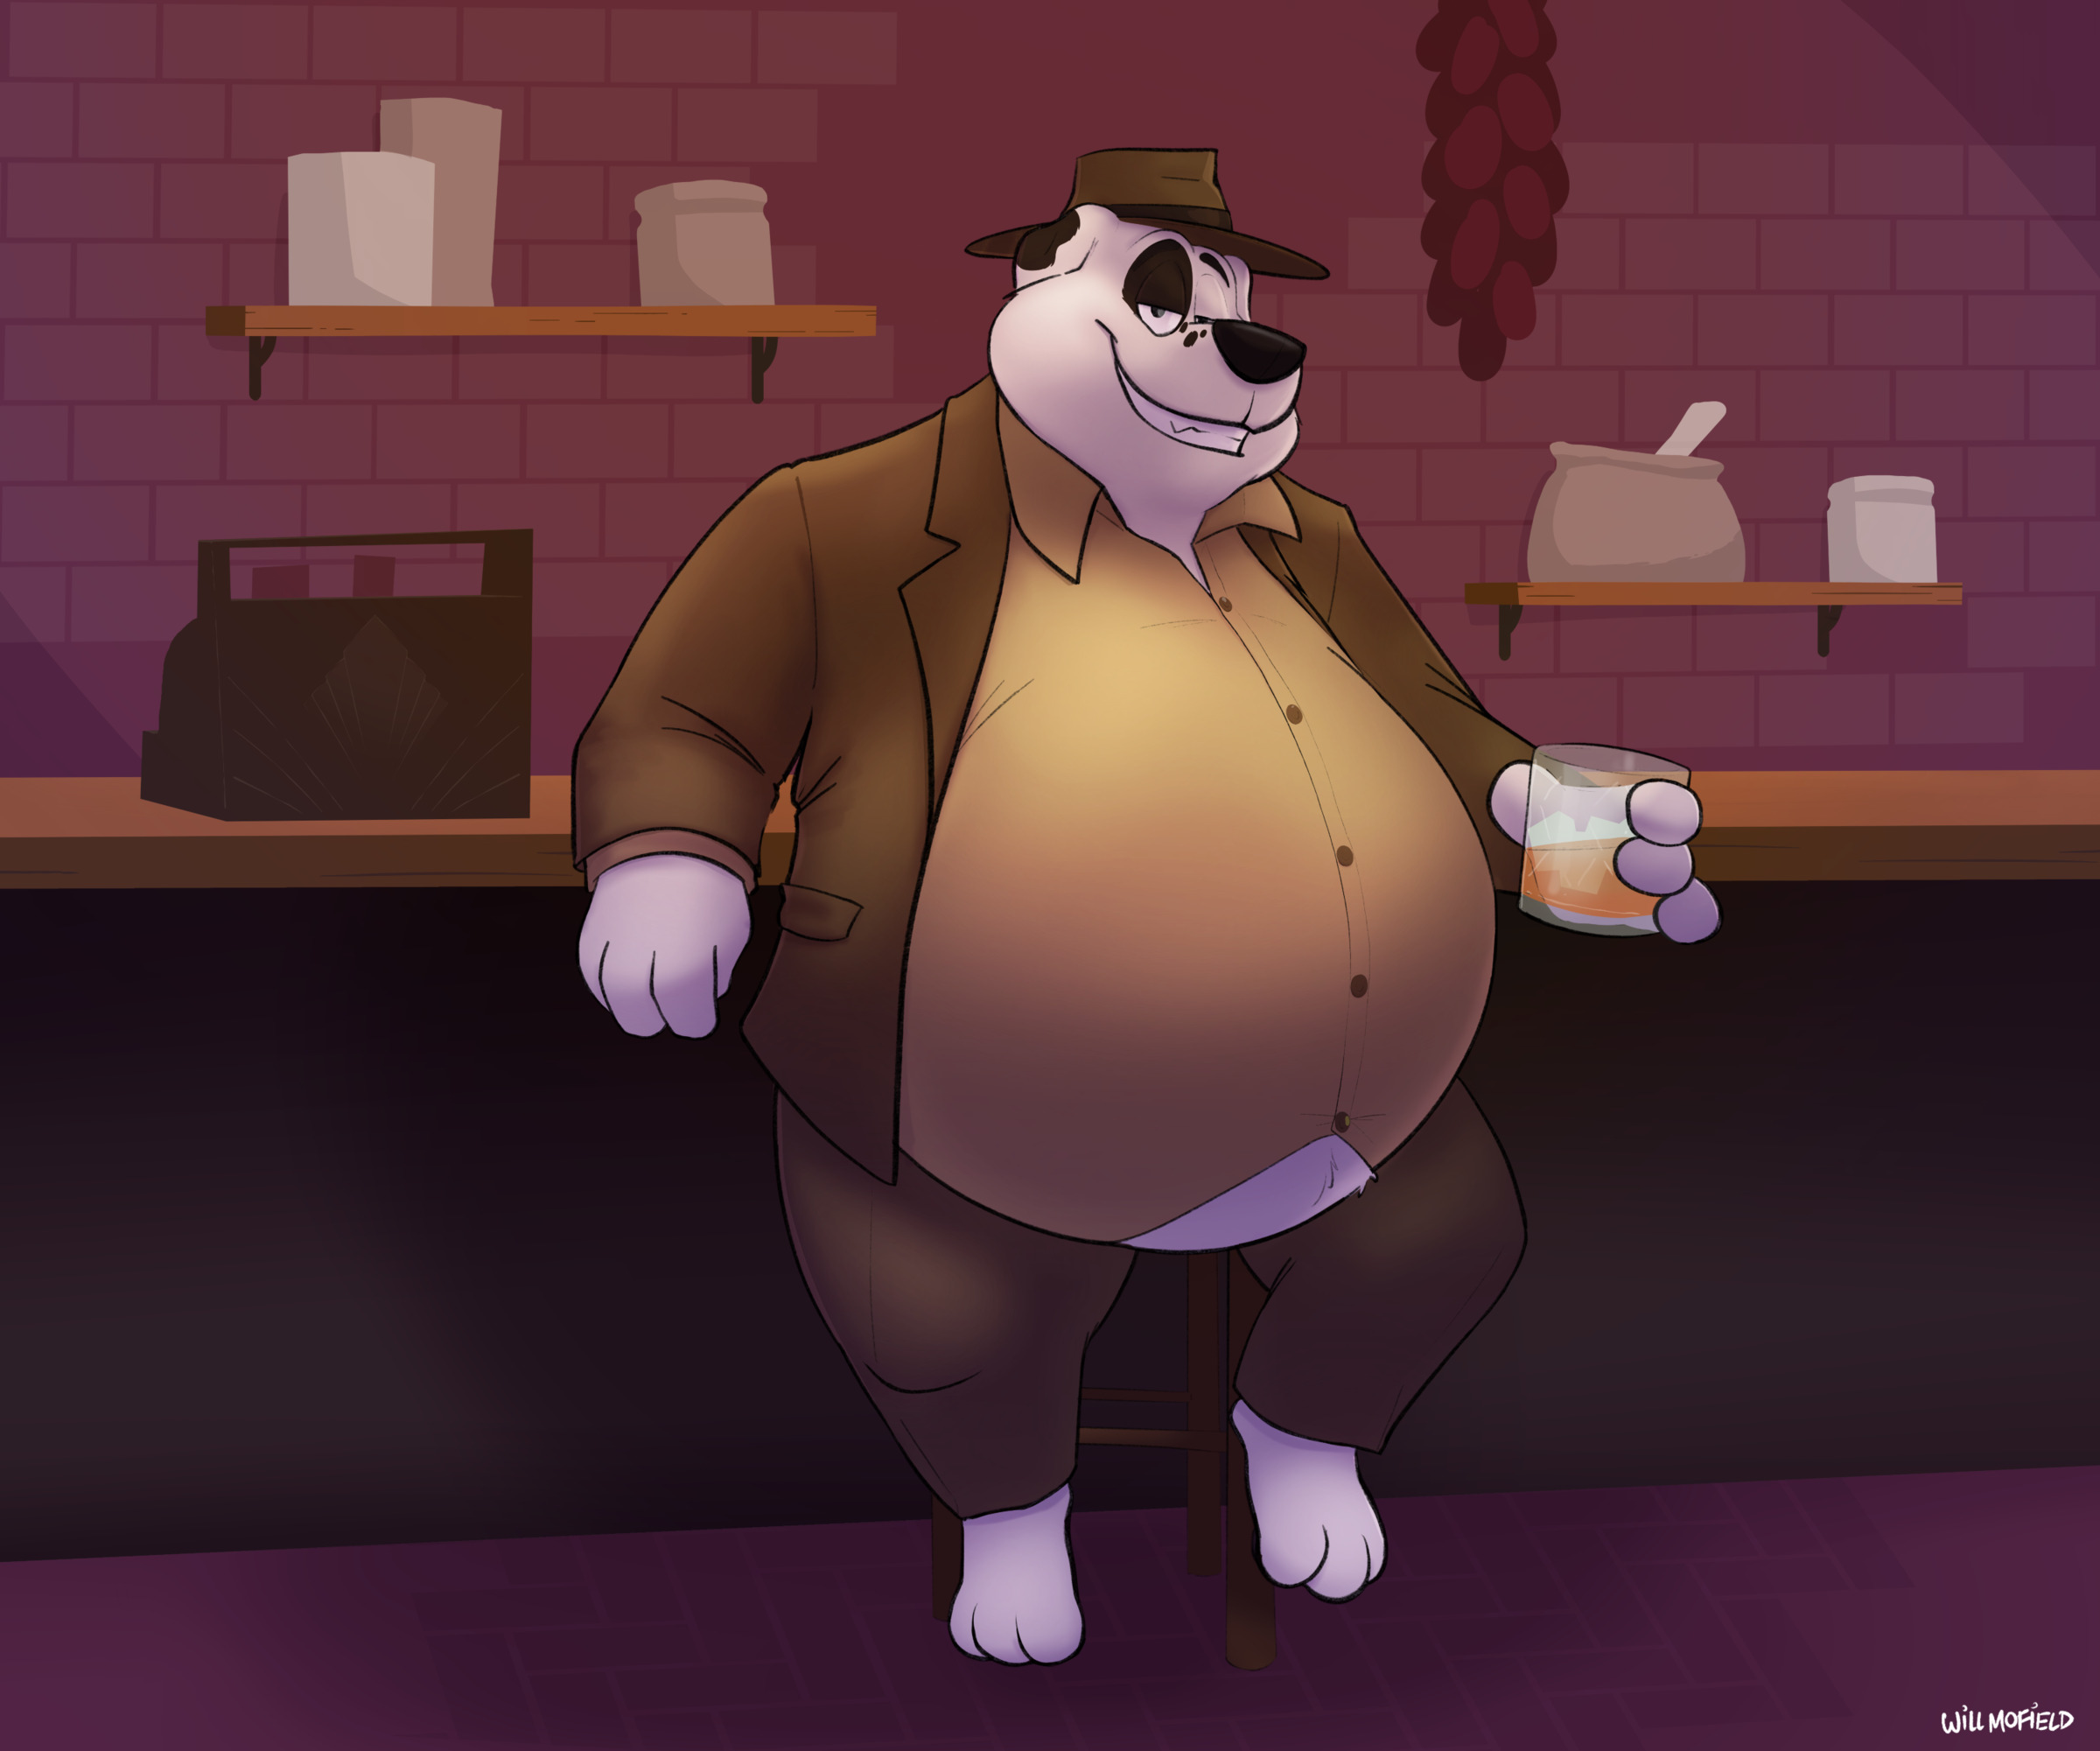 A fat cartoon dog in a suit leaning on a shop counter, holding a glass of bourbon on the rocks.